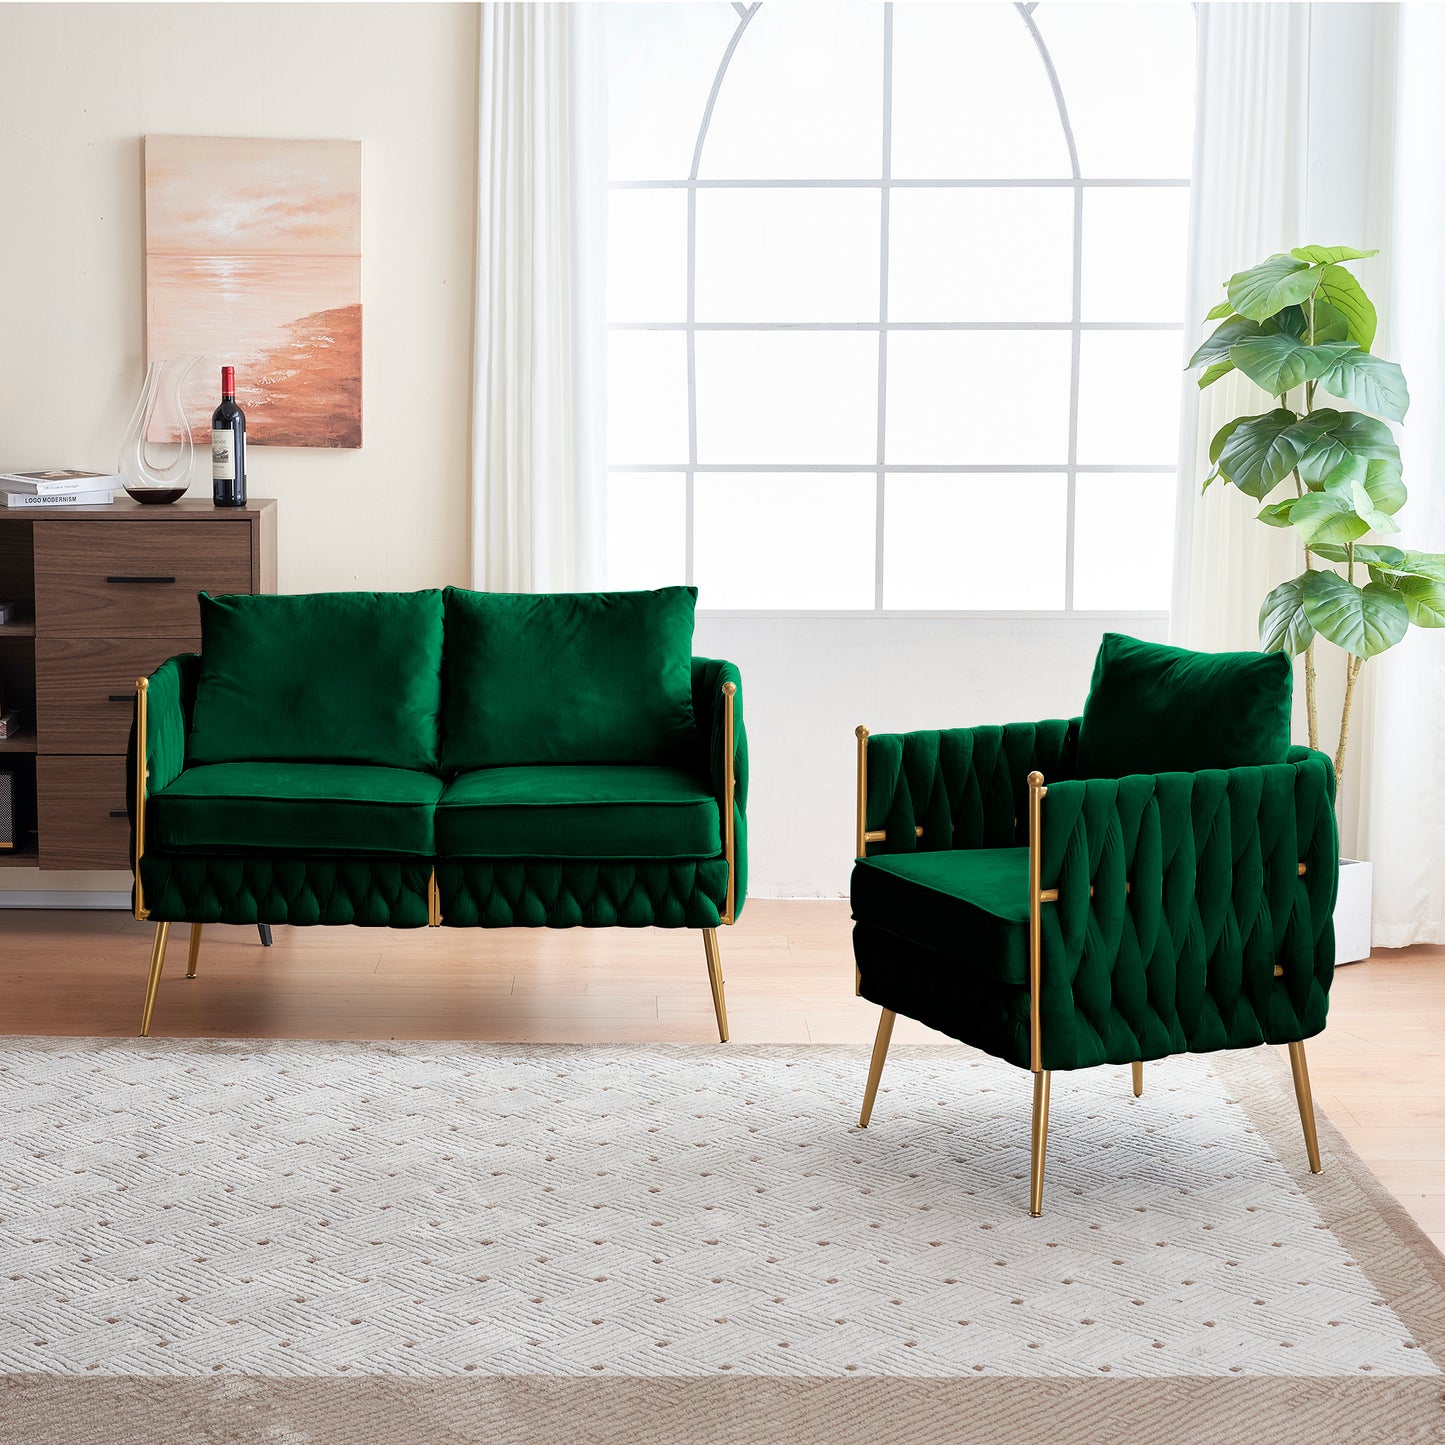 Stylish Handmade Woven Back Upholstered Sofa Set with 1 Accent Chair and 1 Loveseat Sofa, Modern Sofa Set for Living Room And Small Living Spaces , Green Velvet